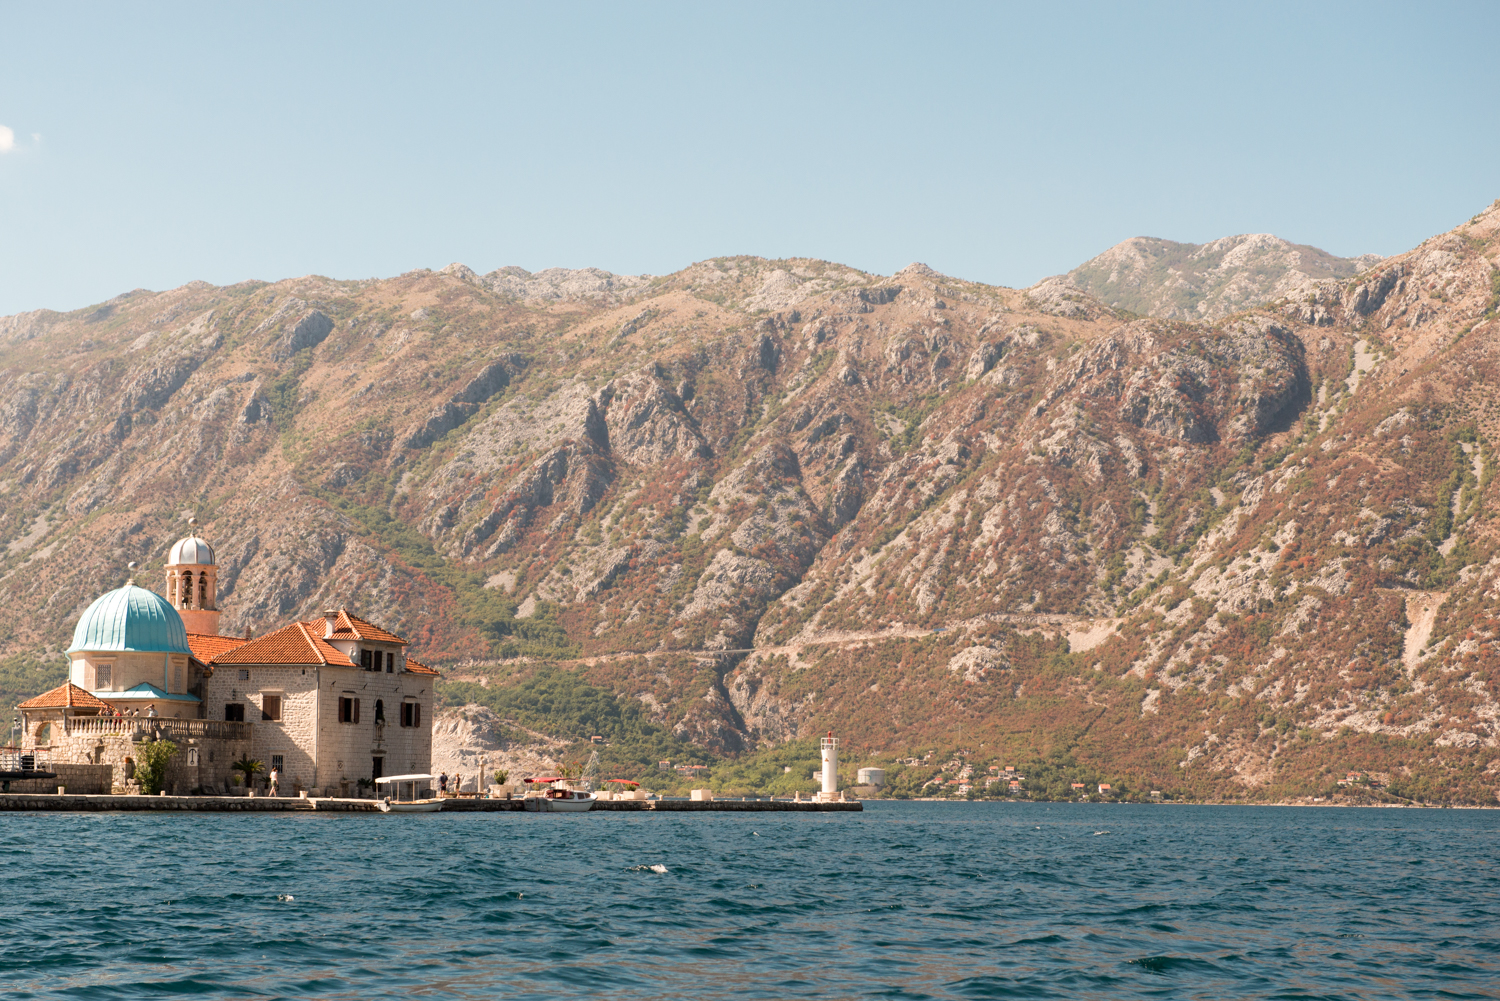 Our Lady of the Rocks island, with its beautiful little church, lies just off the coast from Perast